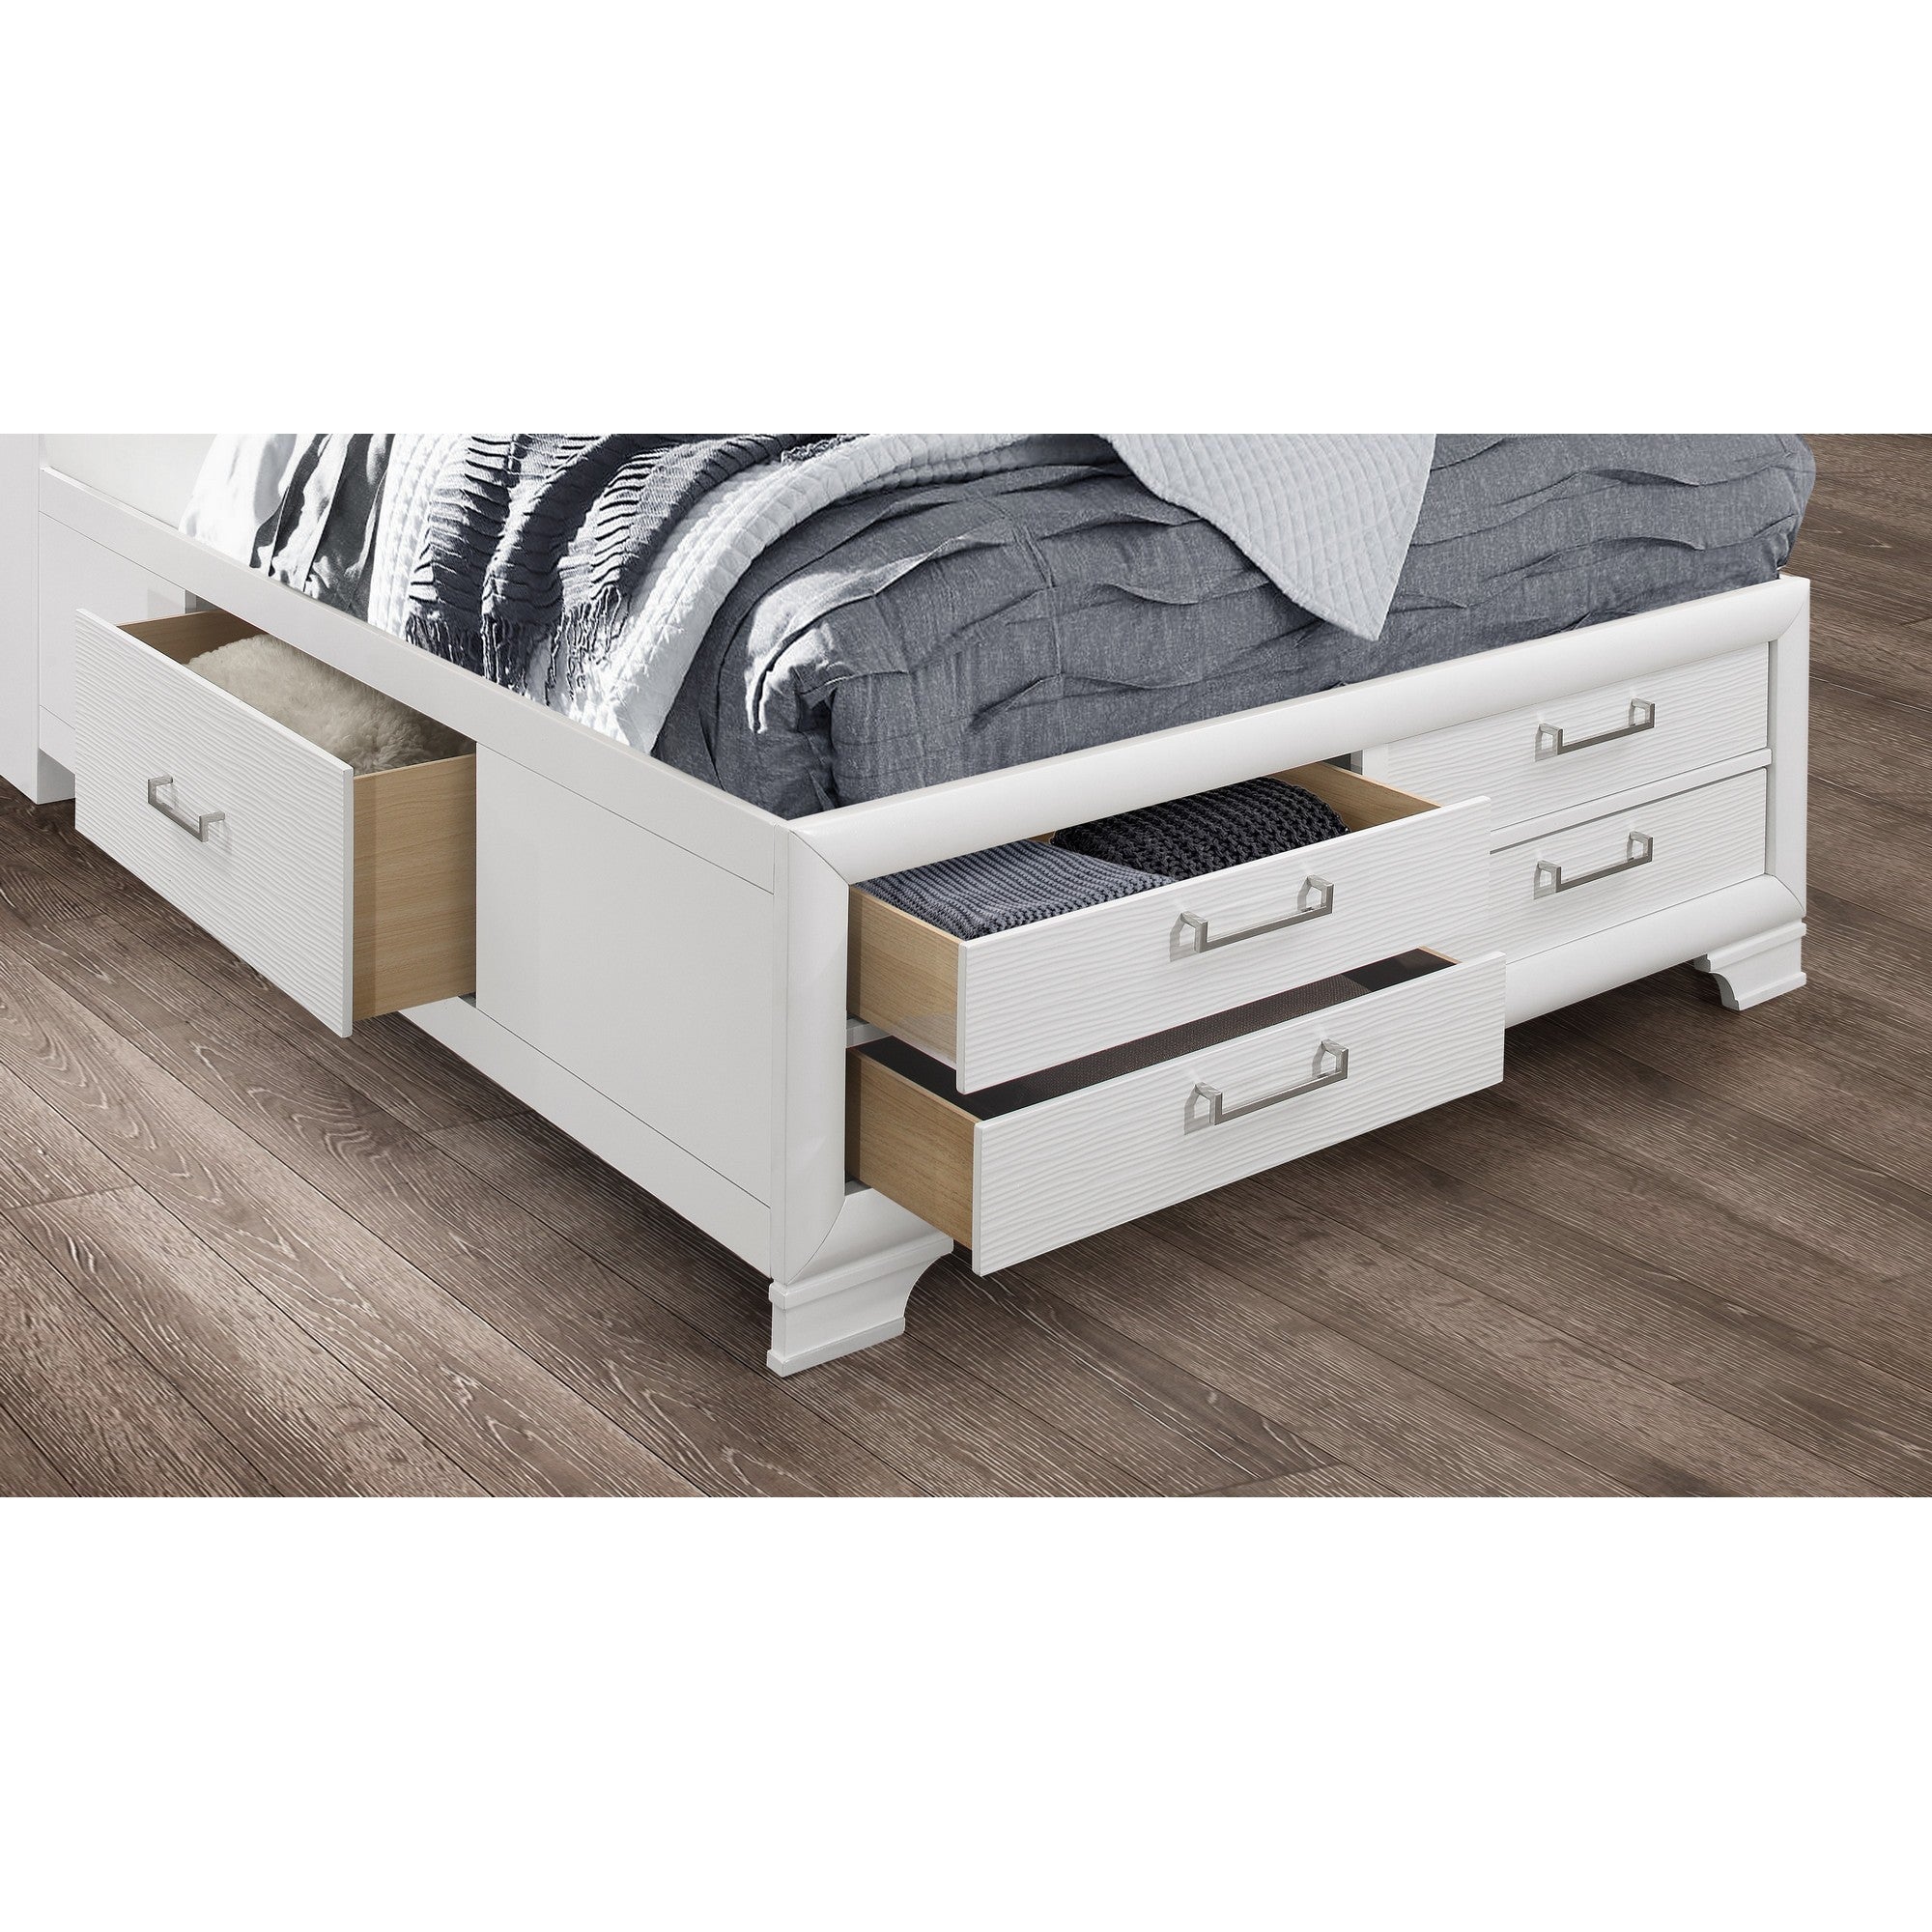 White Rubberwood Queen Bed with bookshelves Headboard  LED lightning  6 Drawers